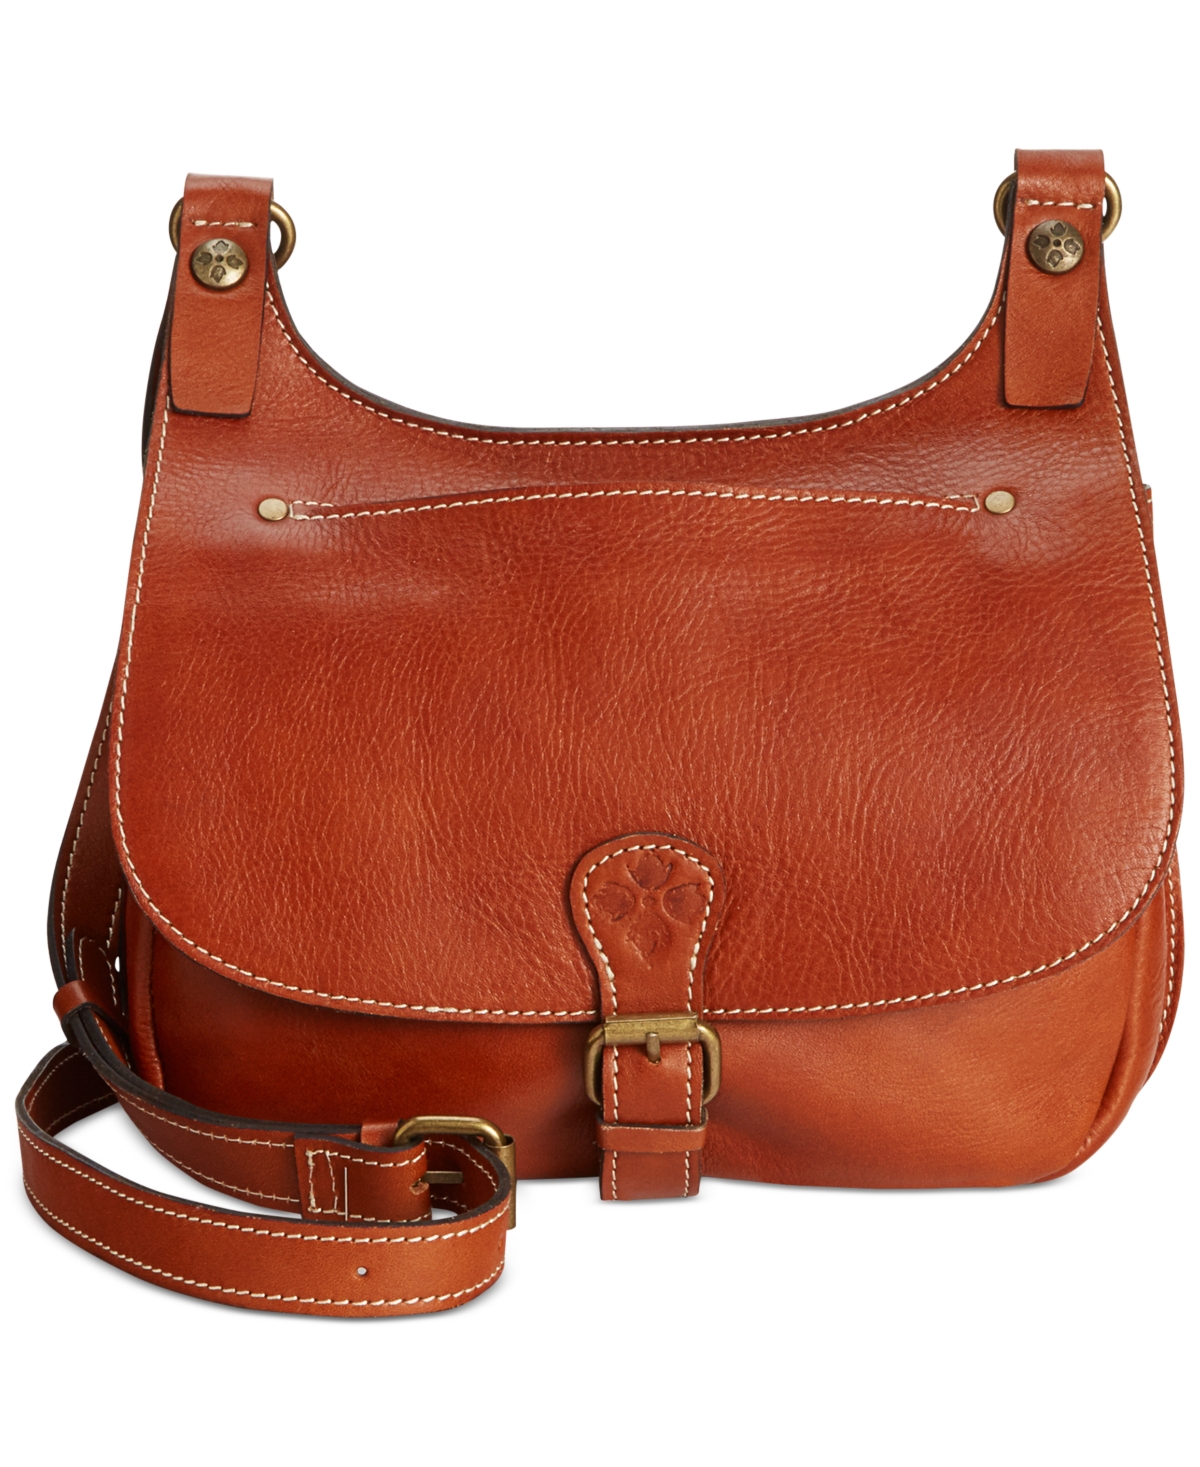 Patricia Nash London Smooth Leather Saddle Bag In Tan,gold